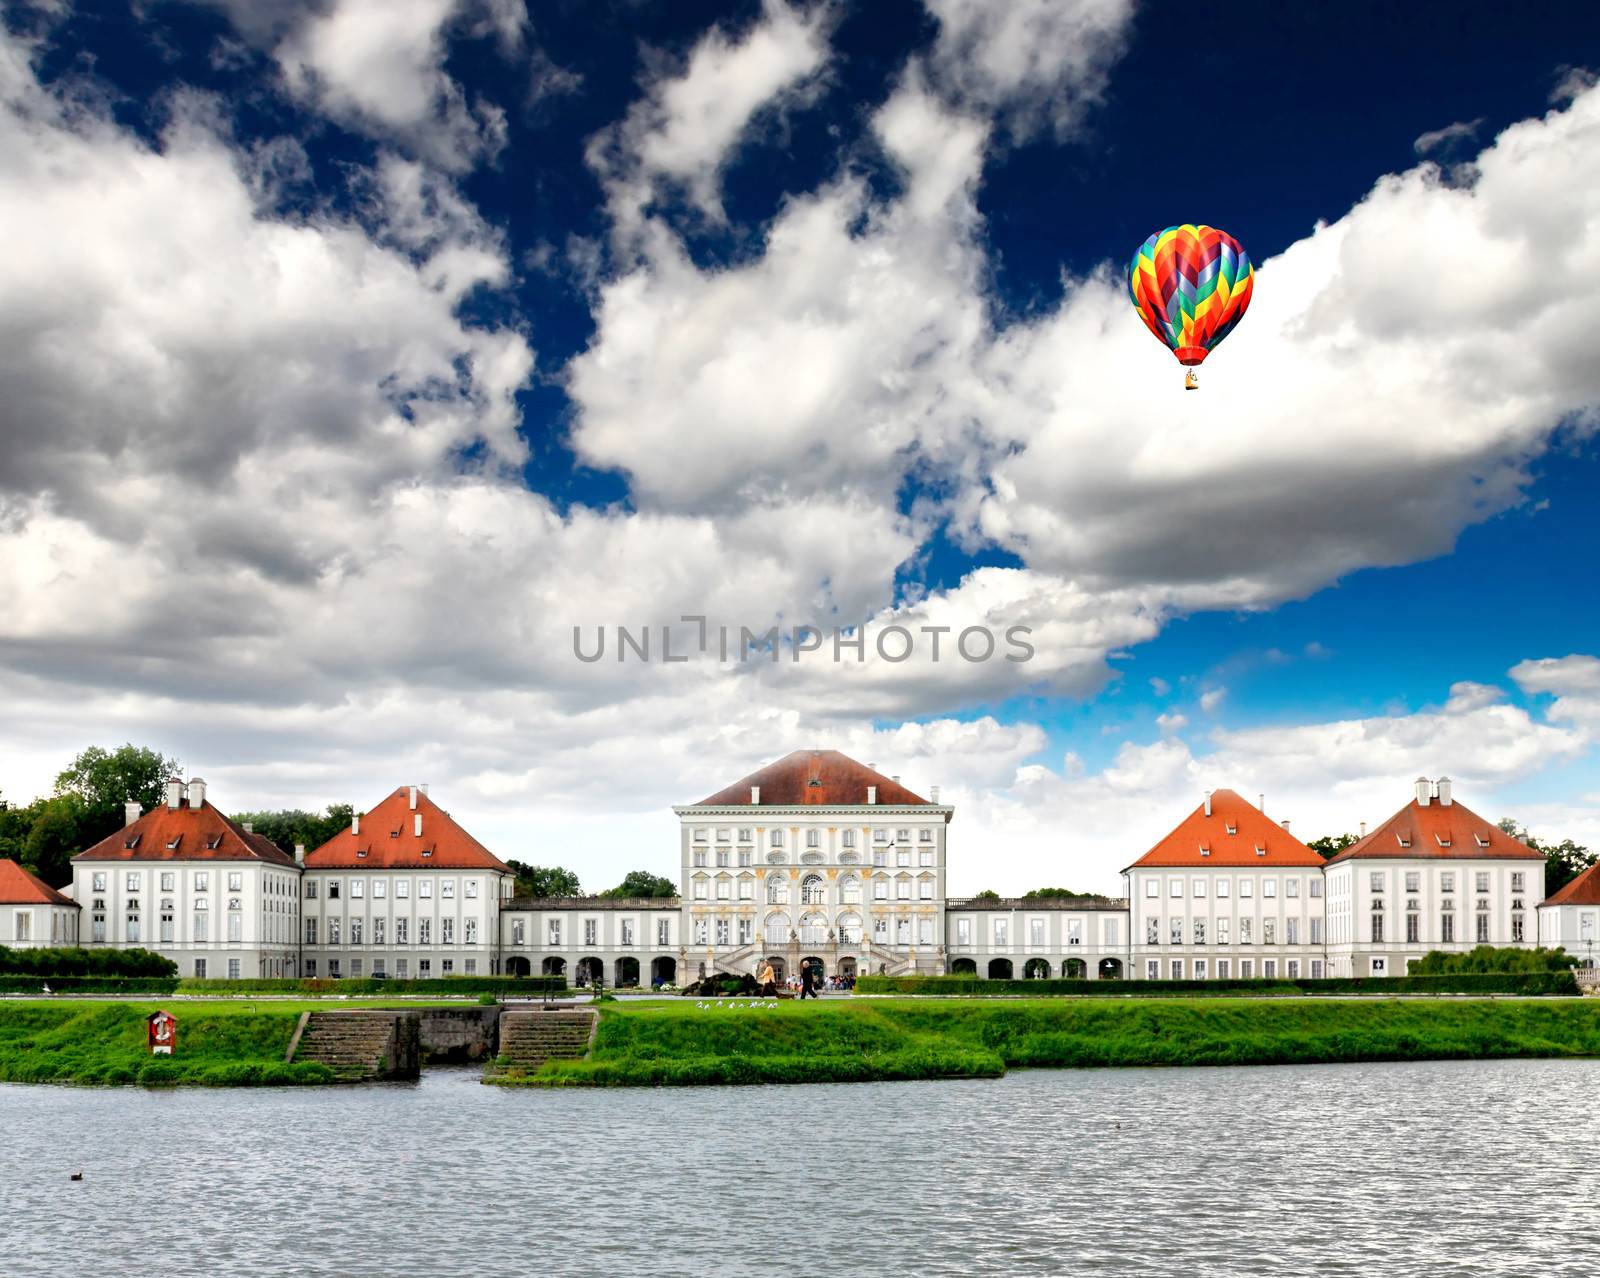 The Nymphenburg Palace in Munich Germany